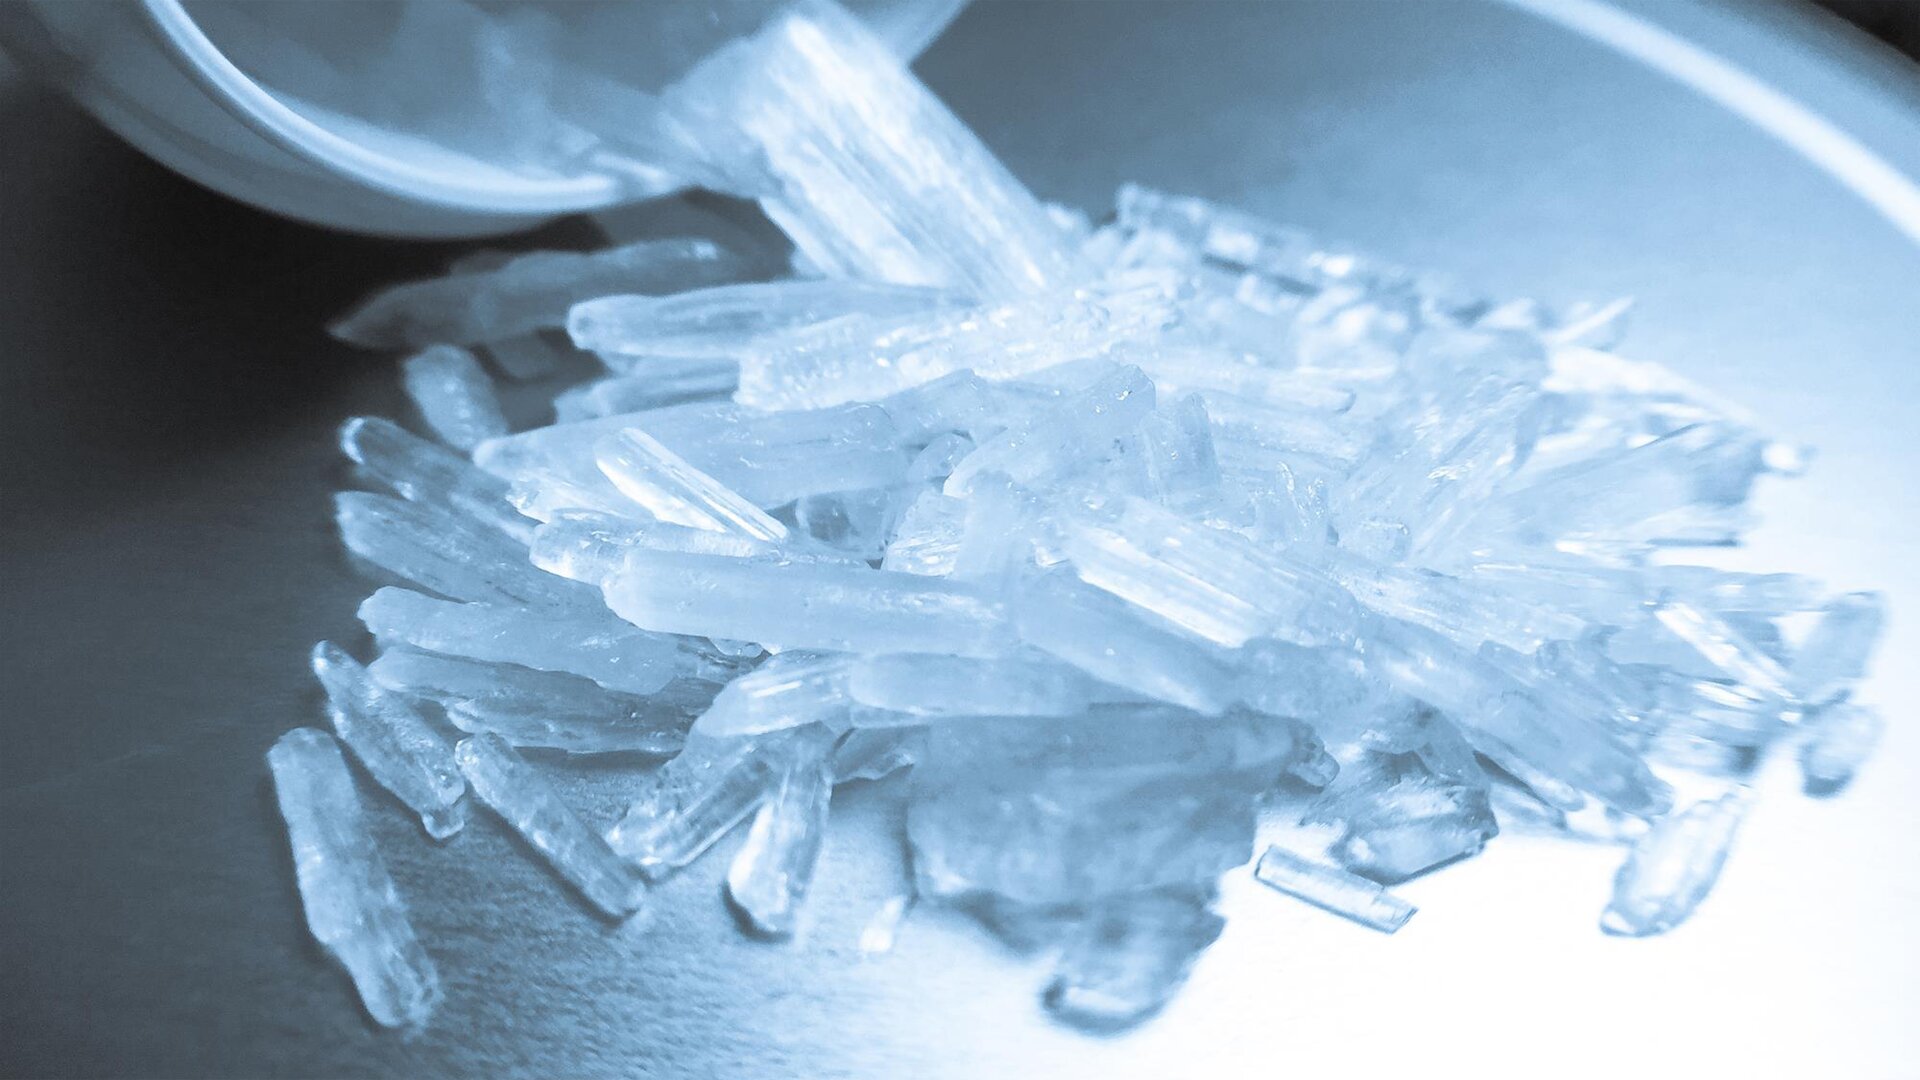 What You Need To Know About Crystal Methamphetamine